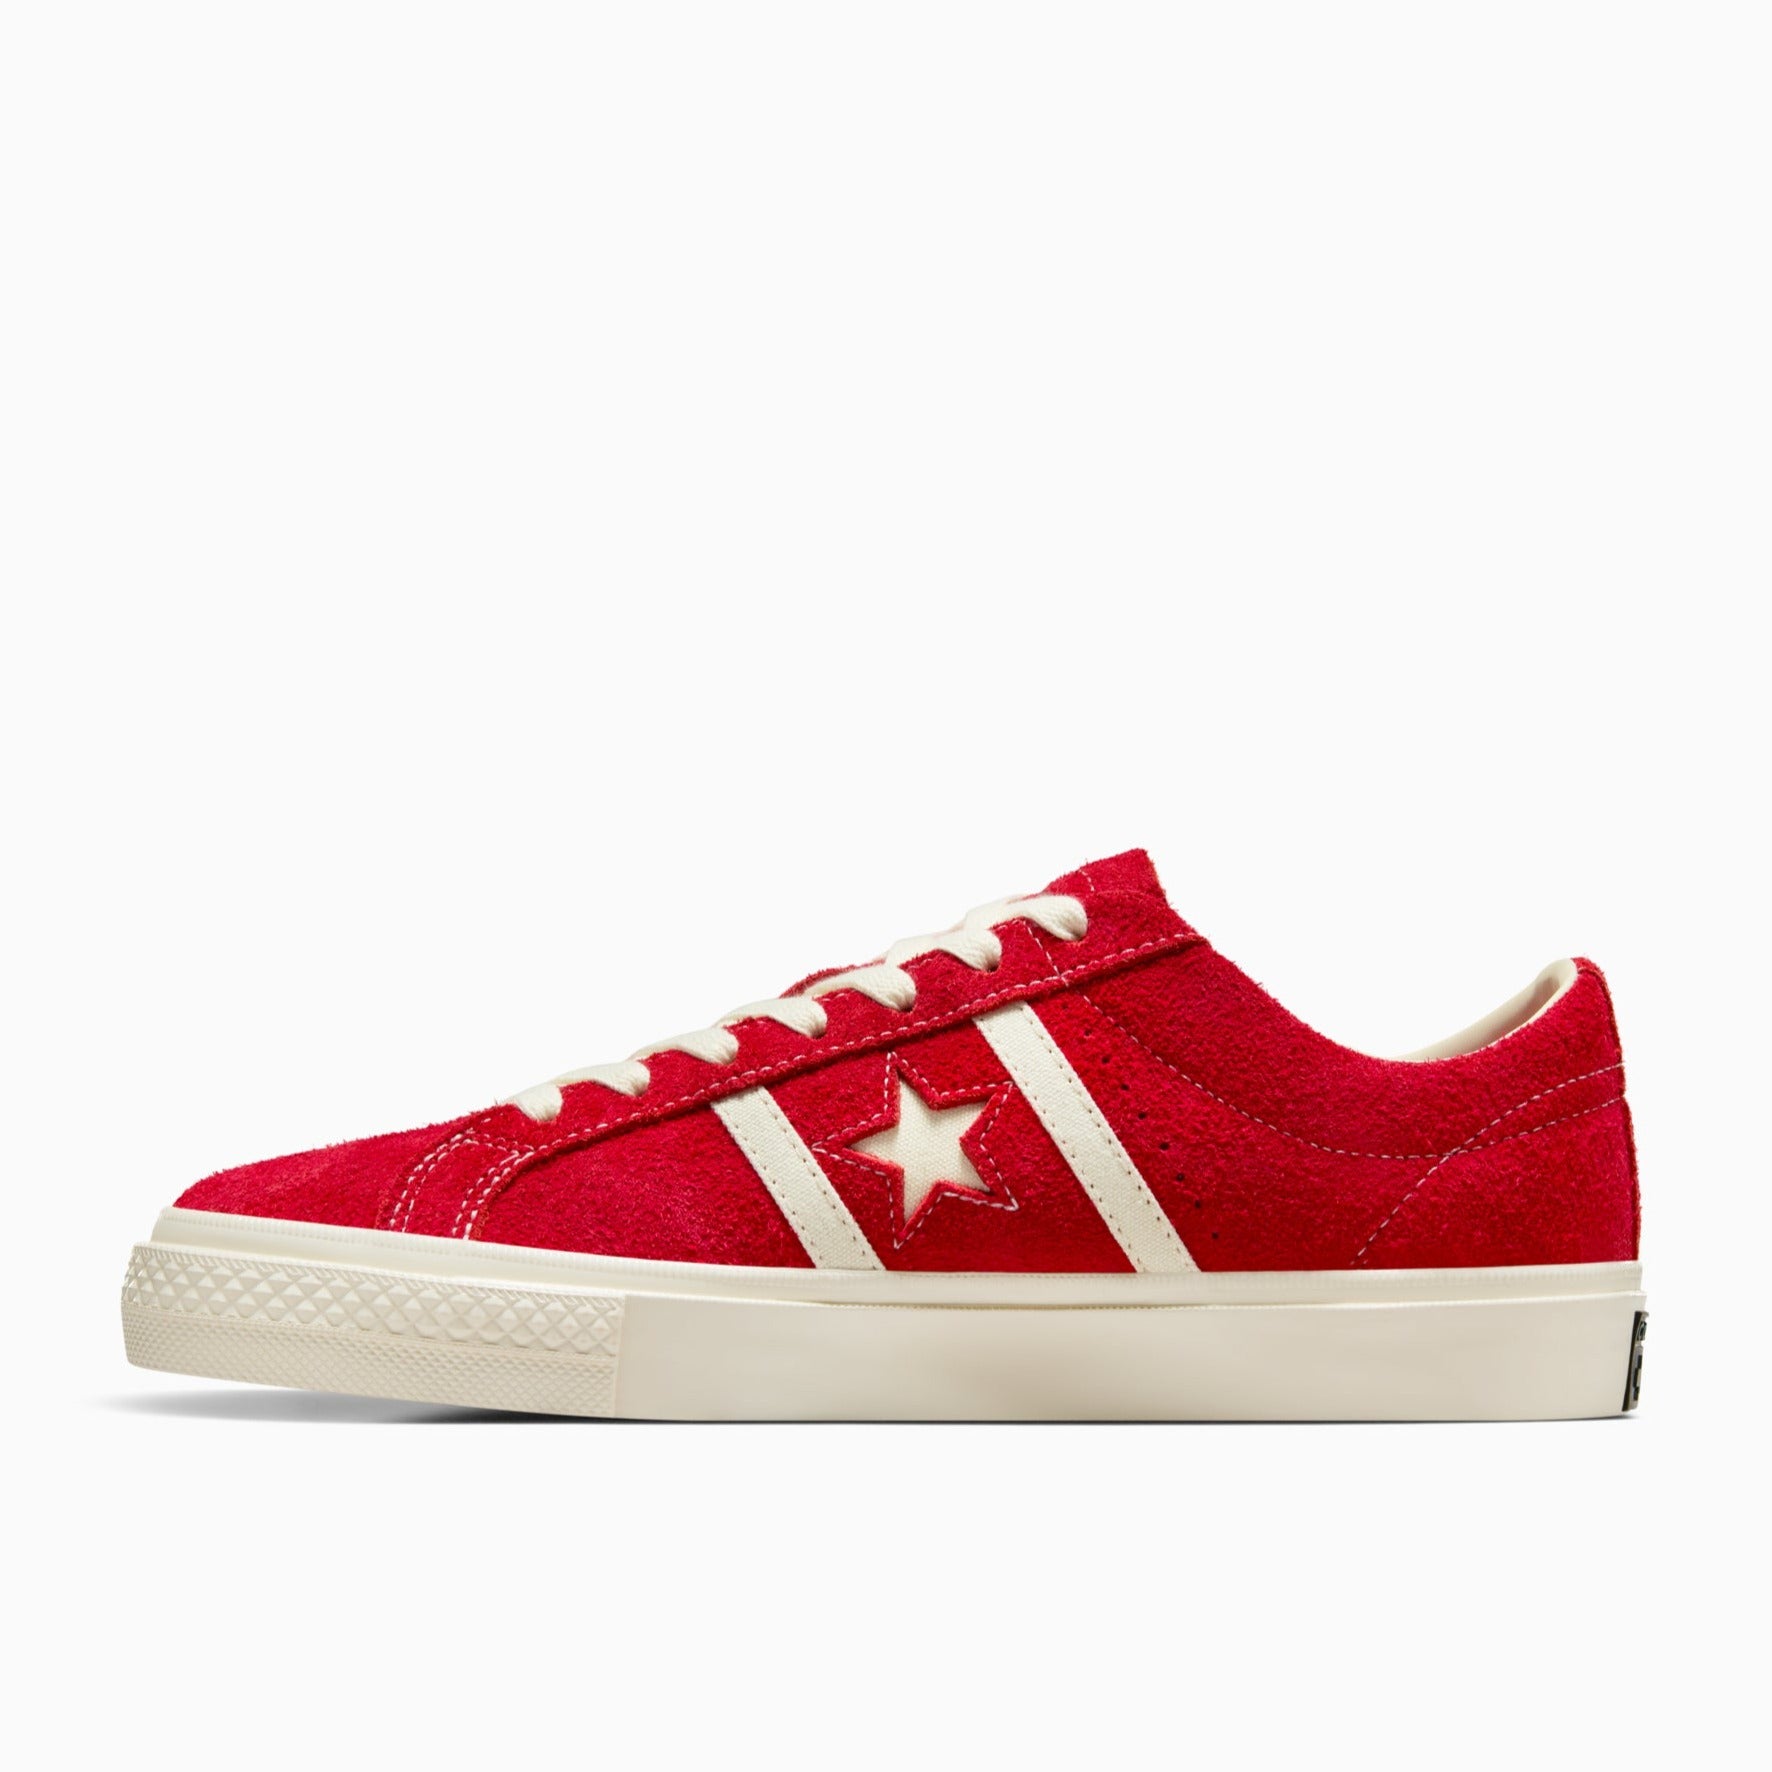 Converse CONS One Star Academy Pro Ox Red/Egret/Egret